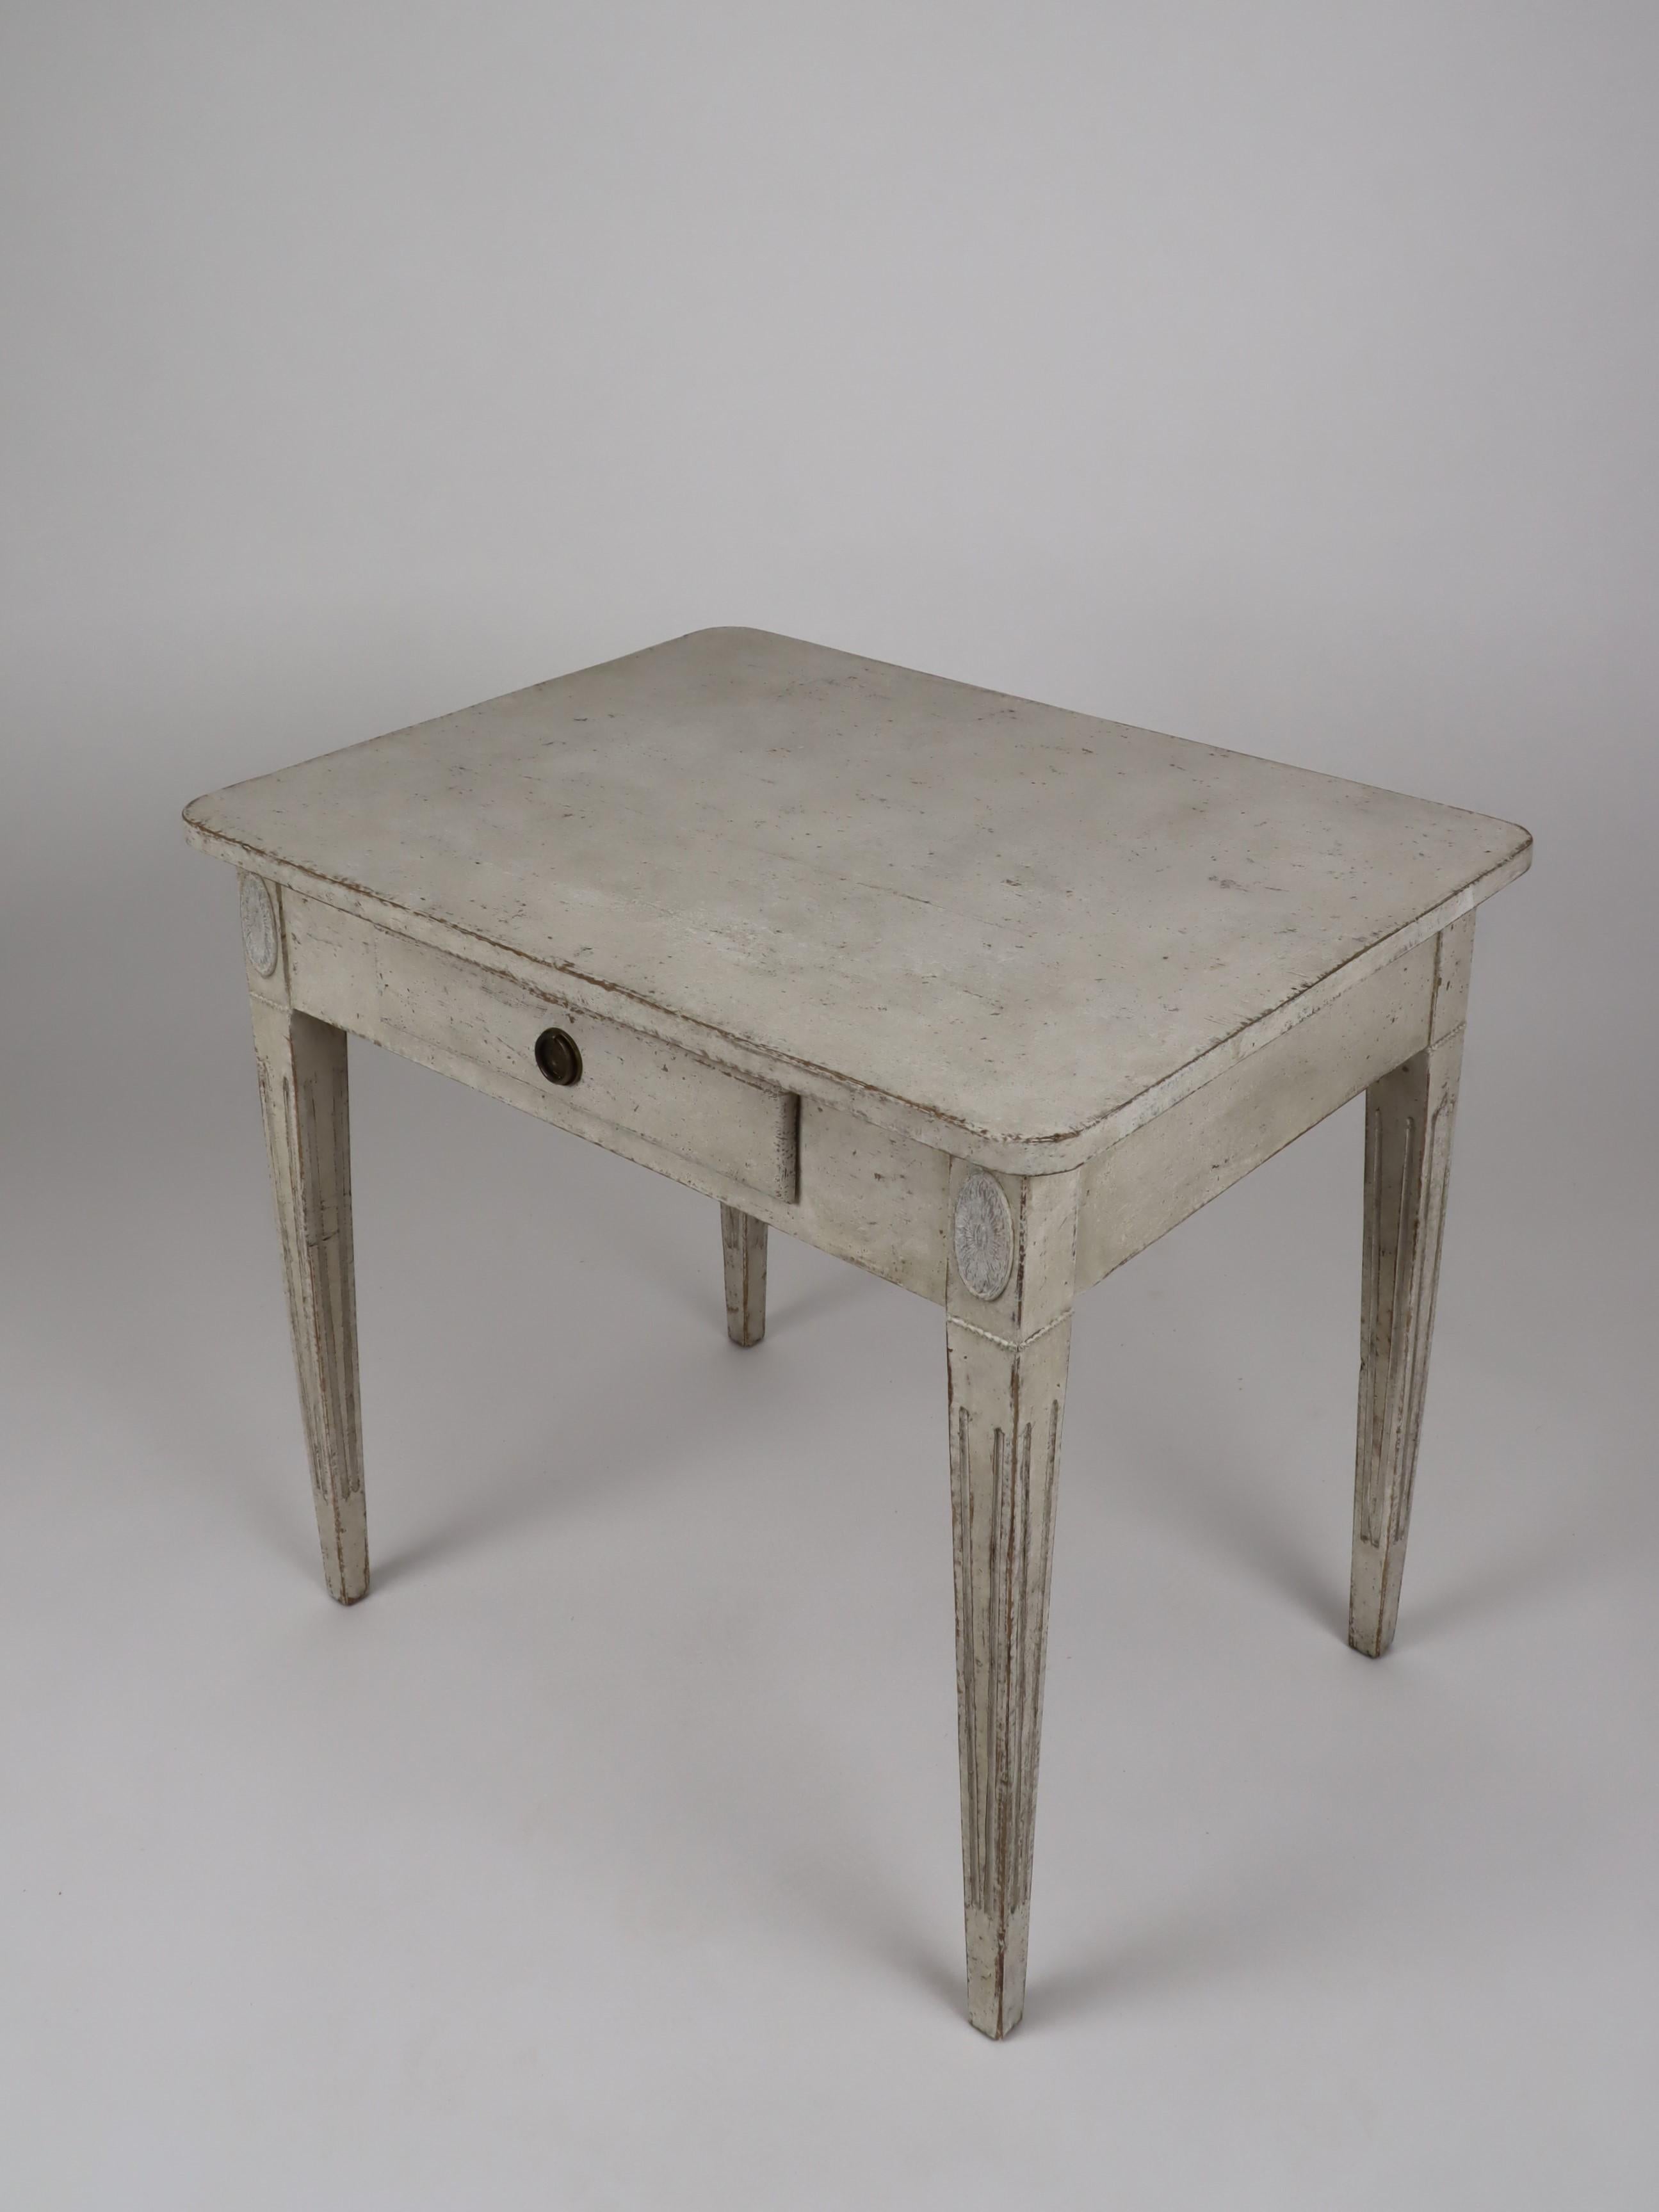 Swedish Gustavian Style 1850s Painted Desk with Single Drawer and Tapered Legs For Sale 3